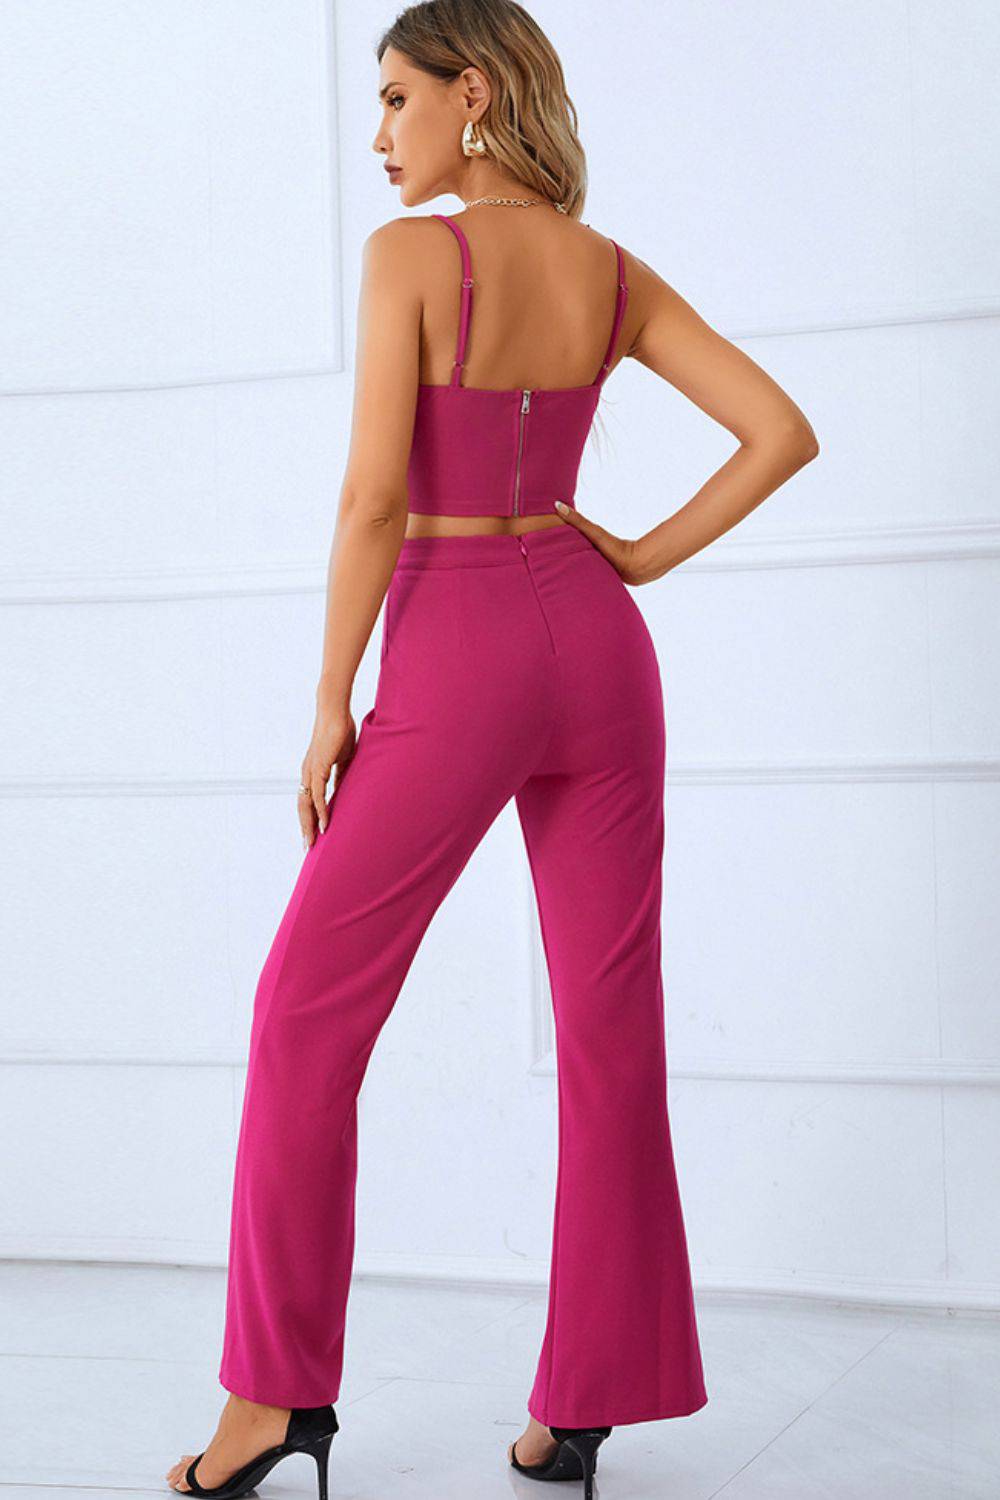 Goddess of Elegance - Adorn Yourself in Pure Romance and Grace with our Sweetheart Neck Sports Cami and Slit Ankle Flare Pants Set - Embrace your Inner Confidence. - Guy Christopher